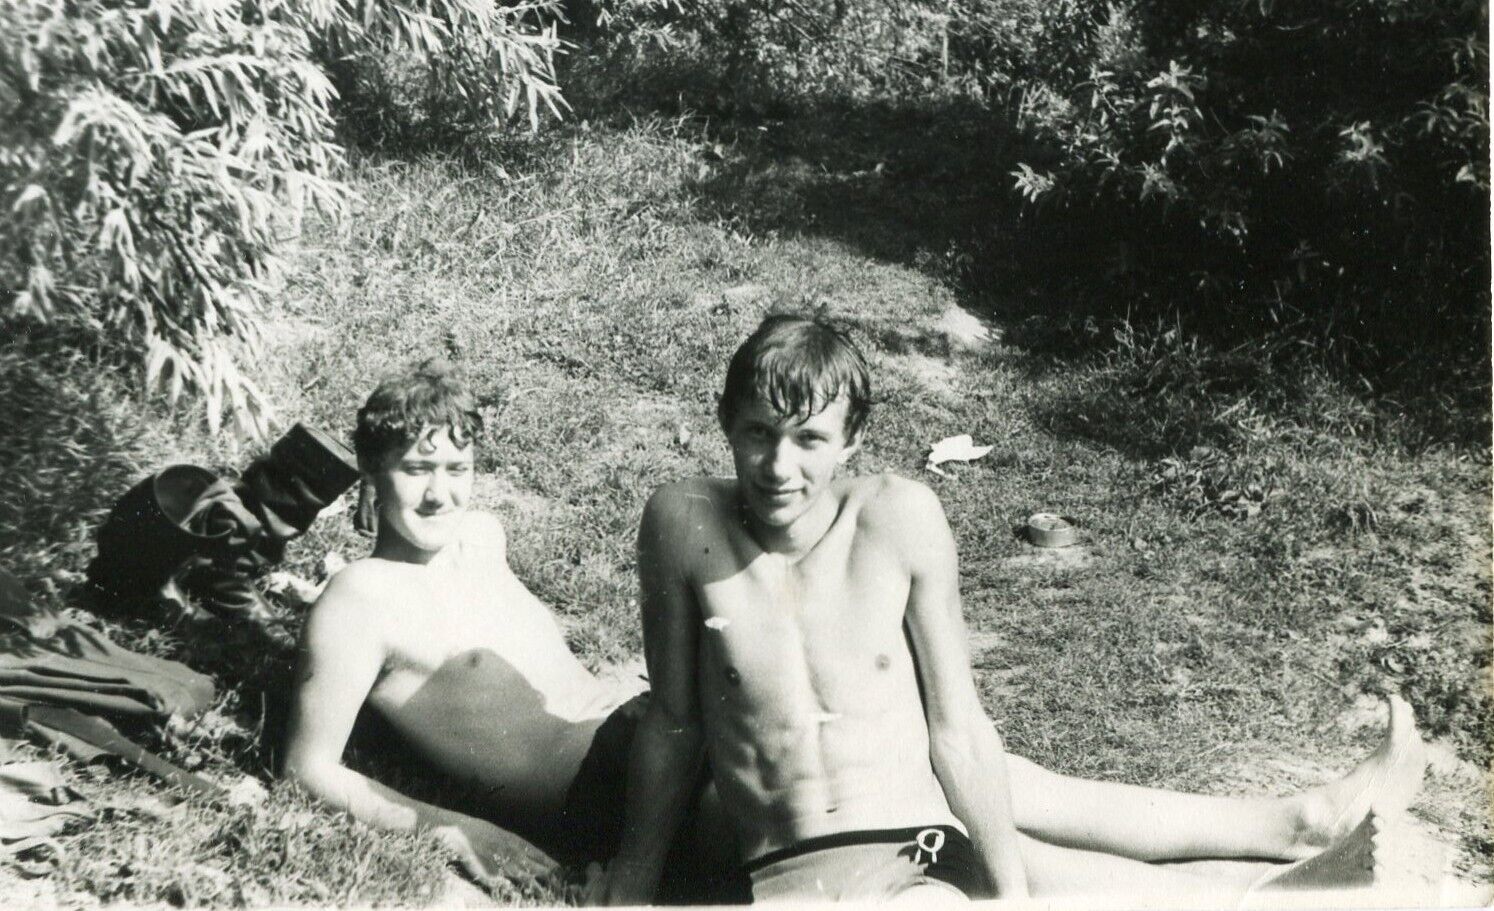 Shirtless Handsome young men couple bulge beach trunks gay vtg photo